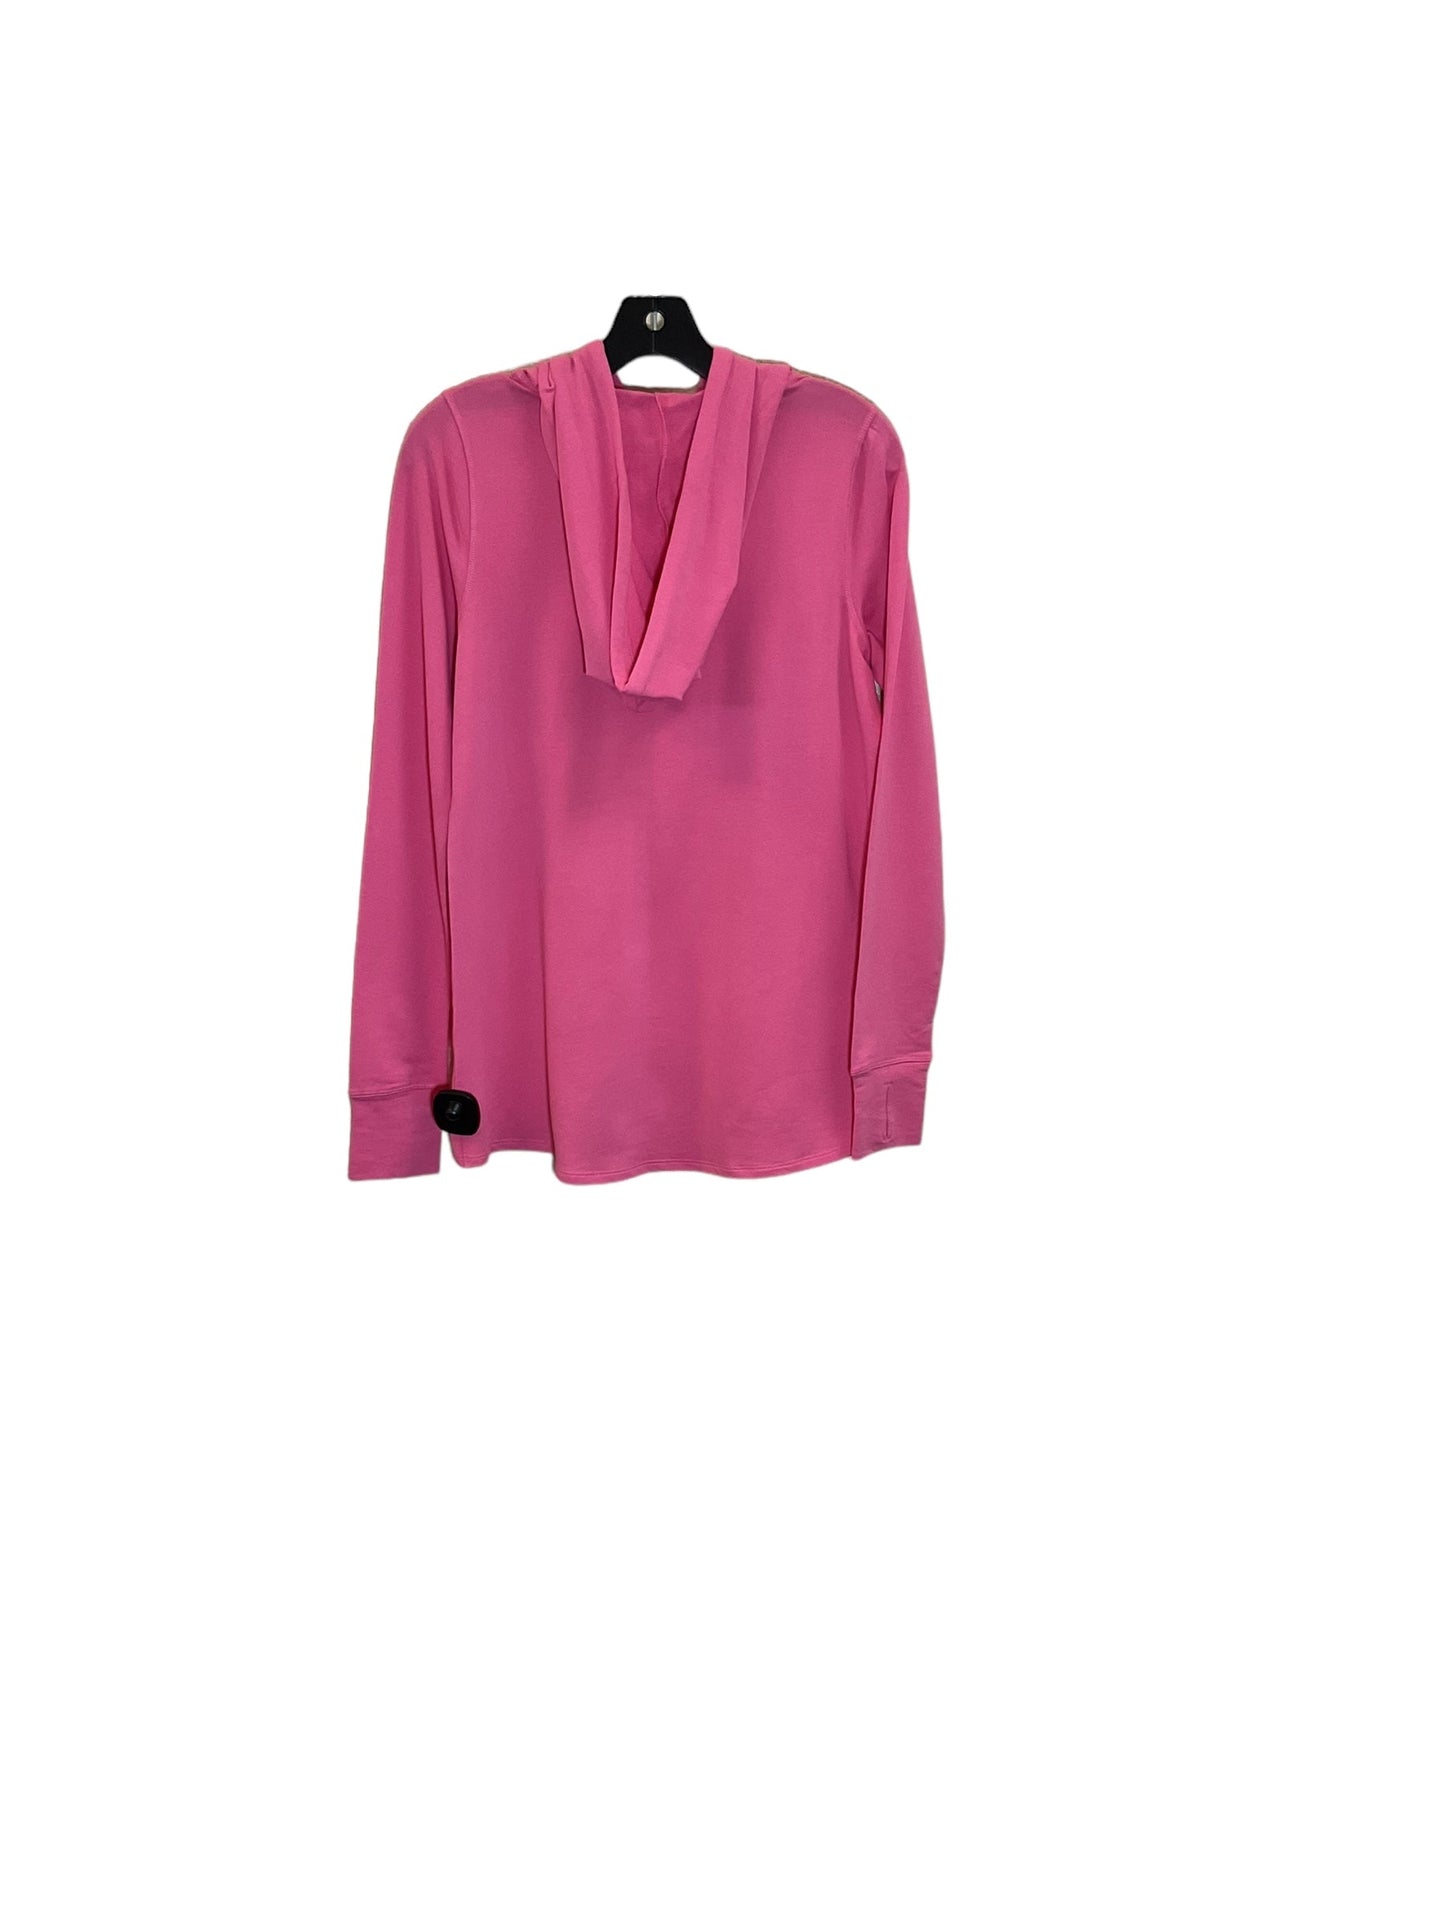 Pink Top Long Sleeve Clothes Mentor, Size Xs